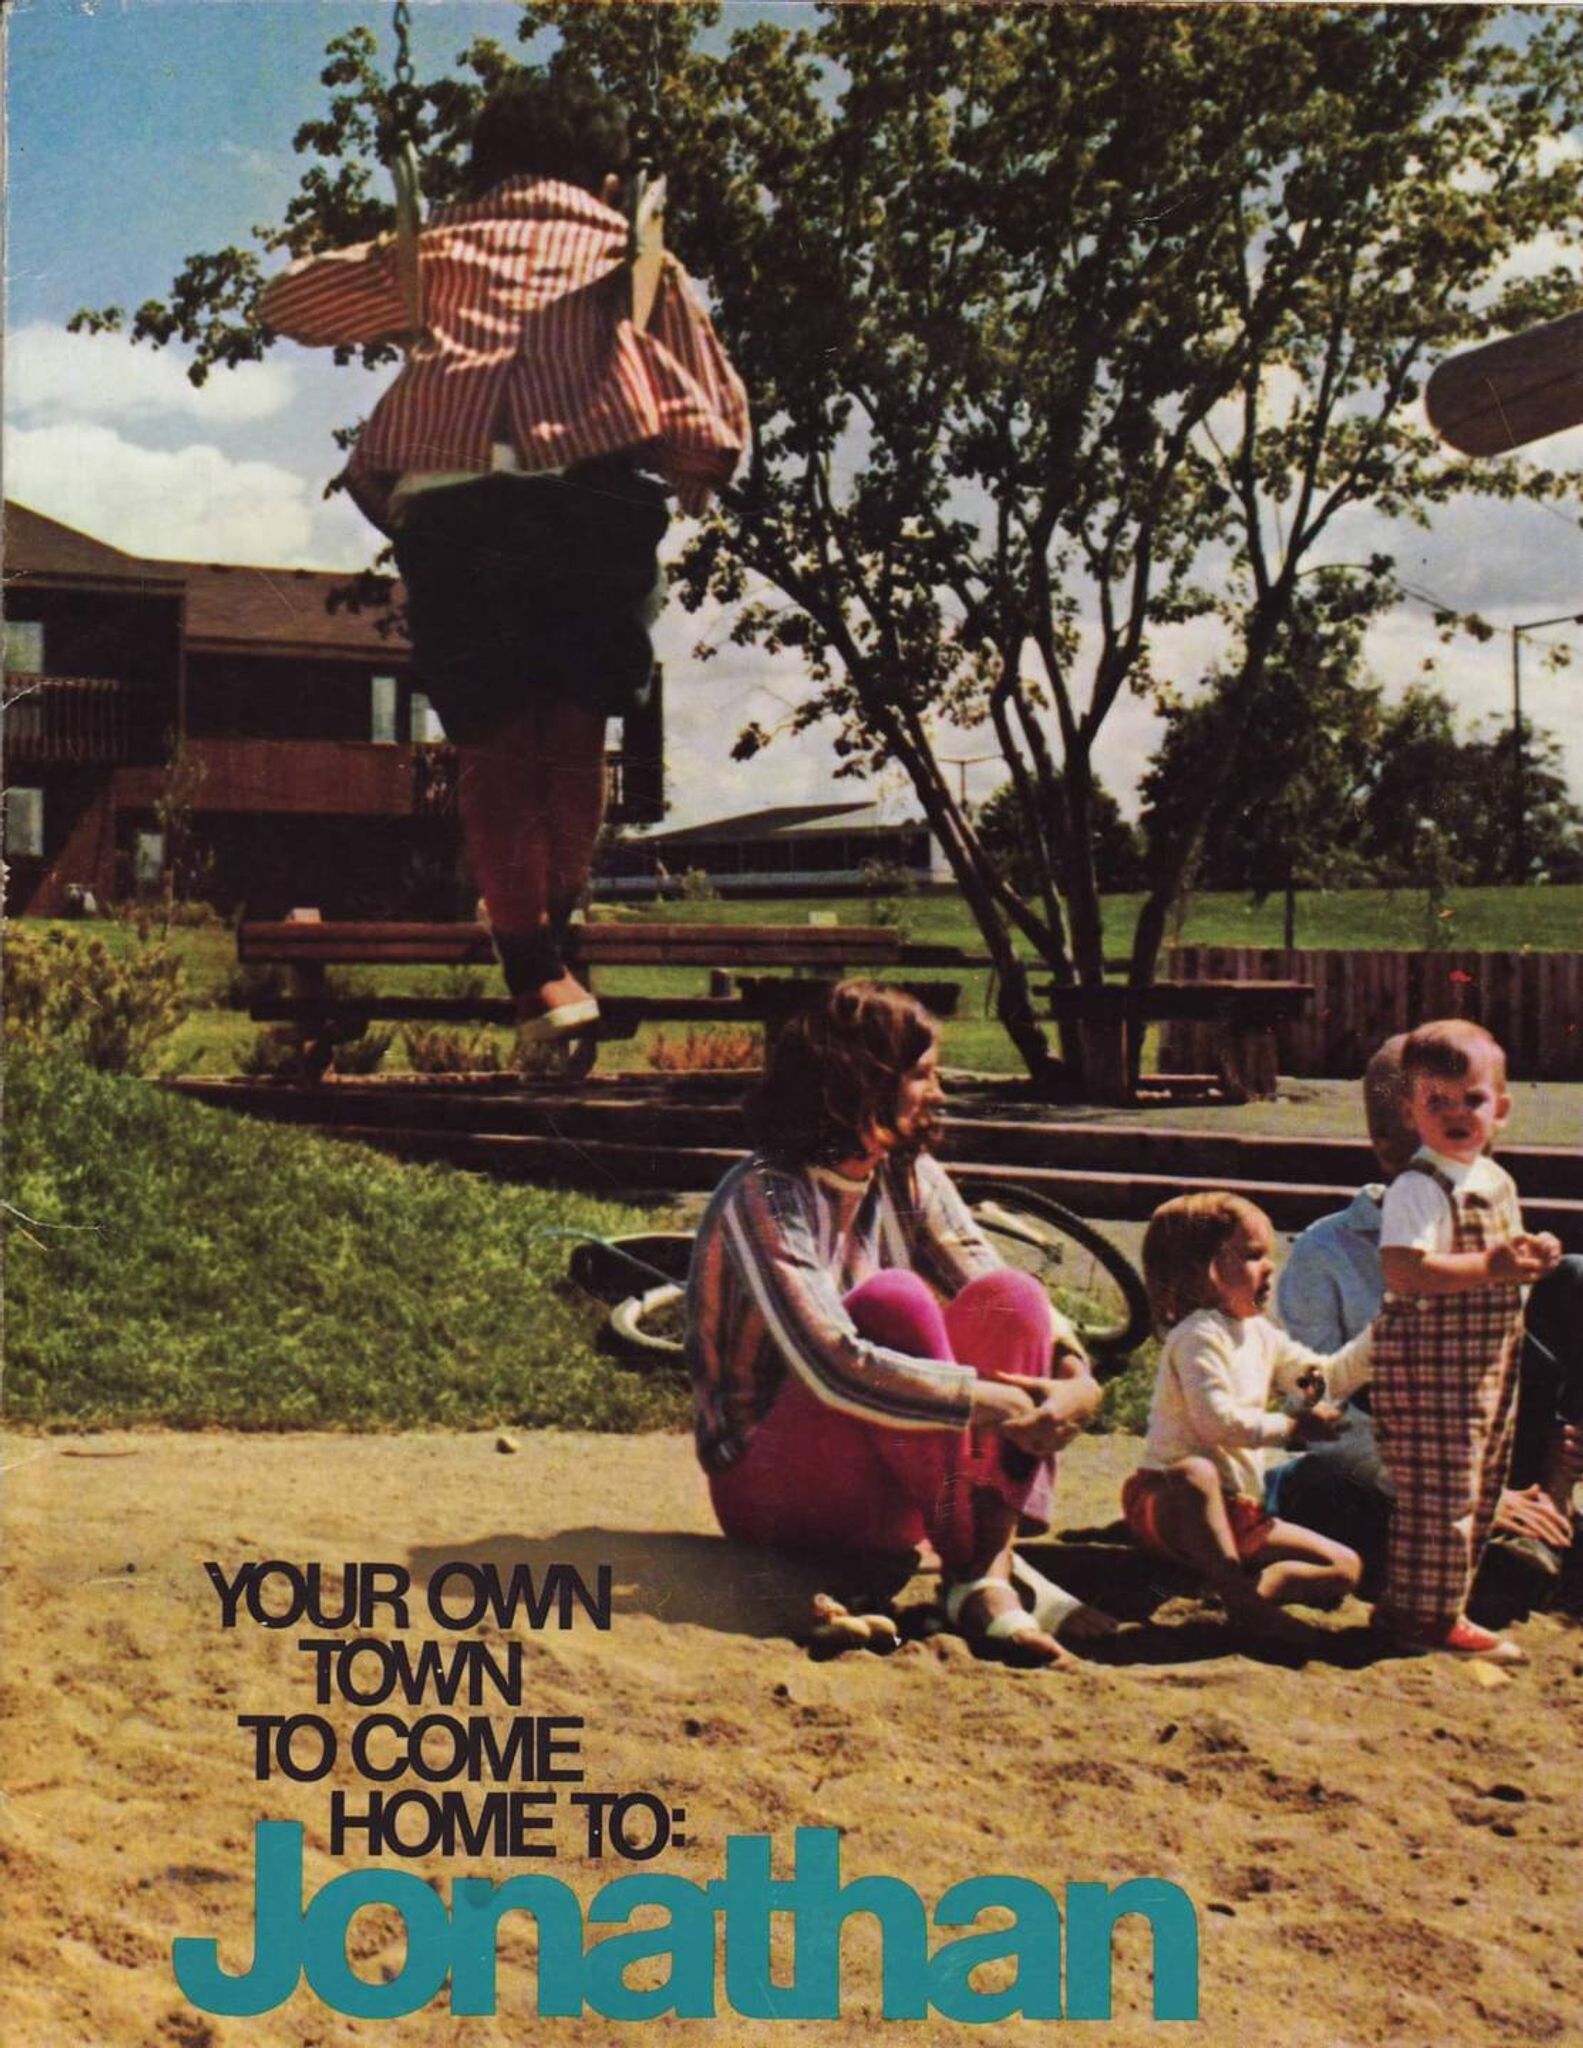 An advertisement for the would-be 'new town' of Jonathan